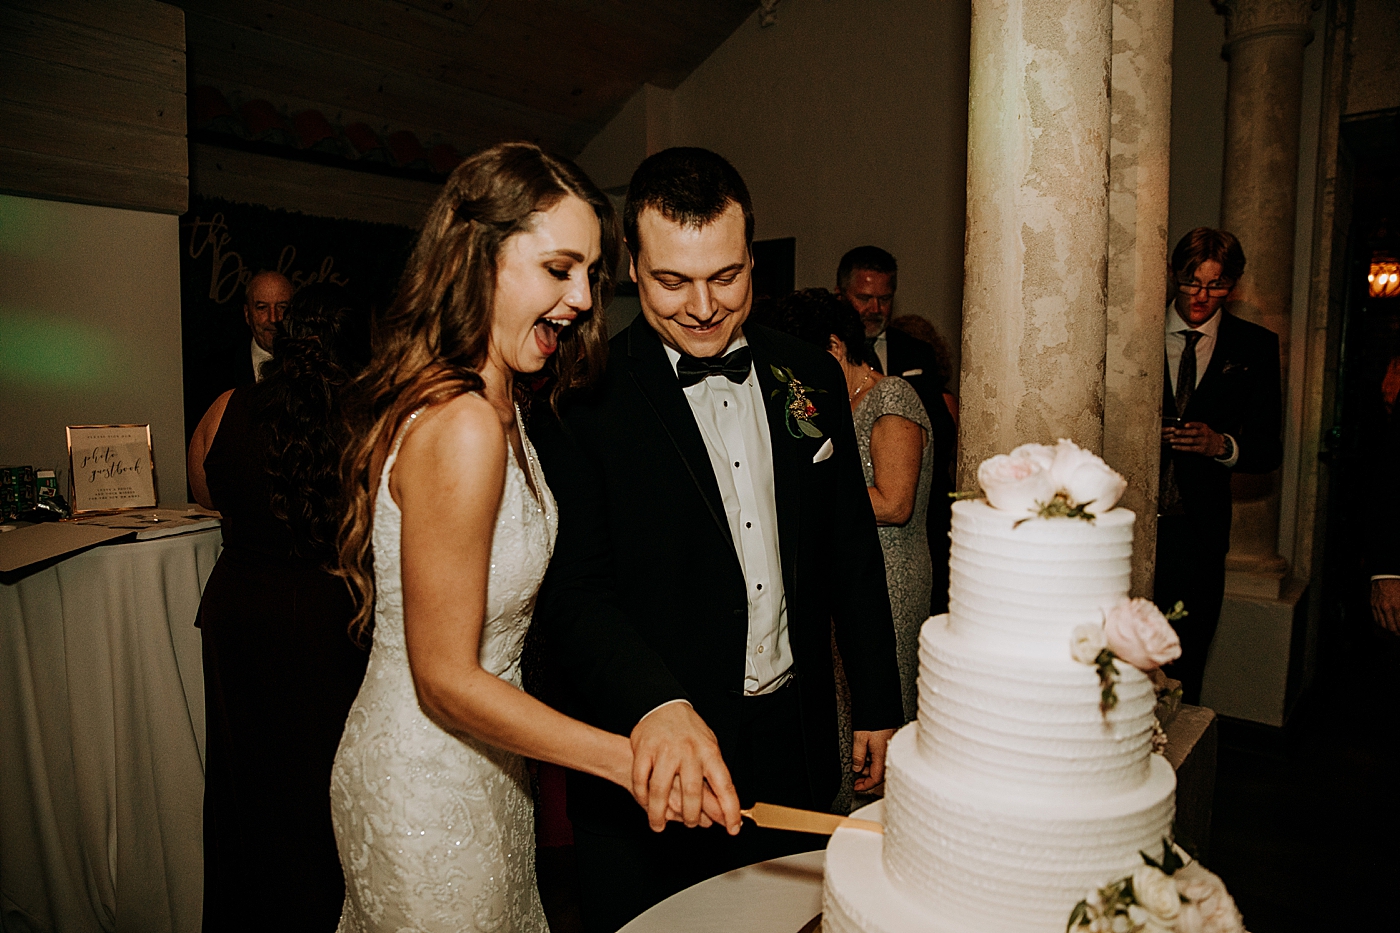 Bride and Groom cutting cake together Coral Gables Country Club Wedding Photography captured by South Florida Wedding Photographer Maggie Alvarez Photography